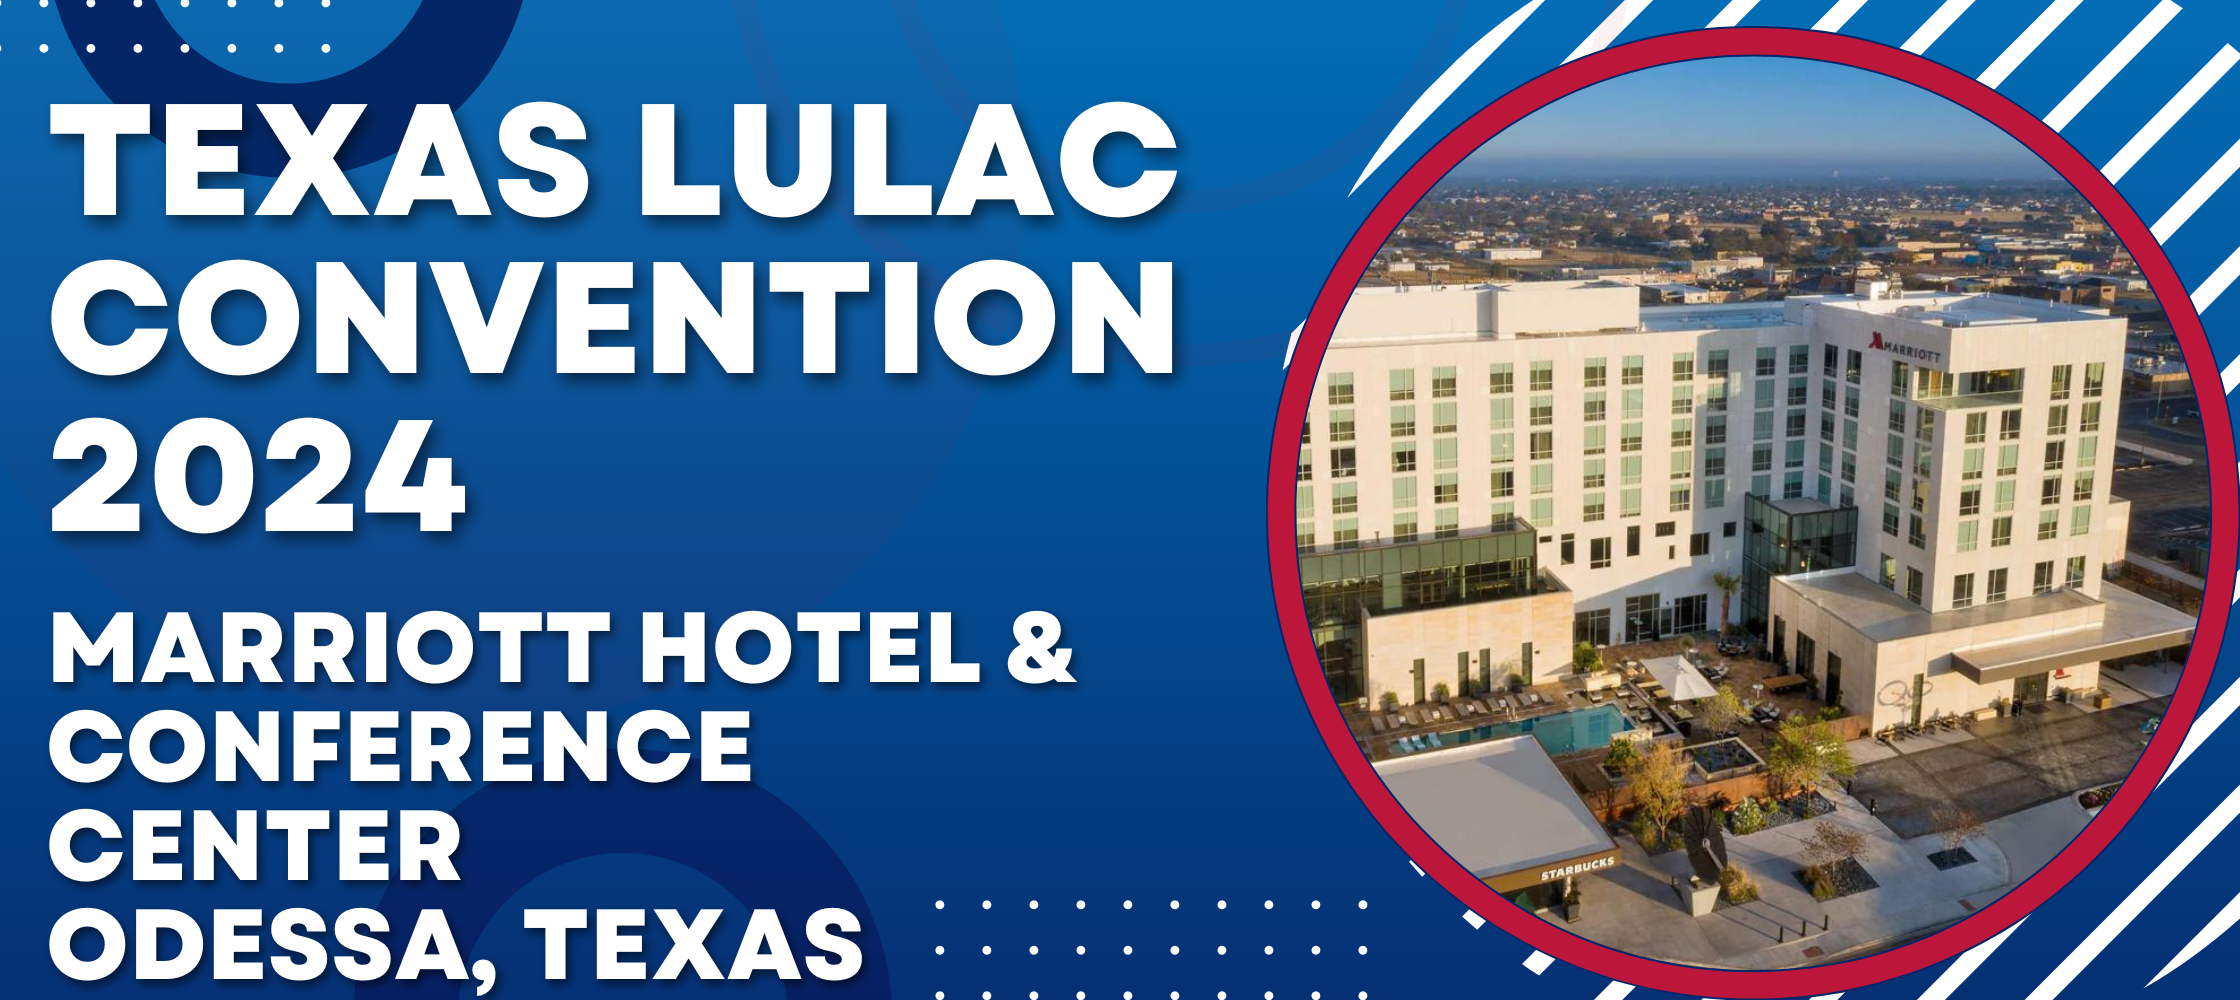 LULAC TEXAS CONVENTION